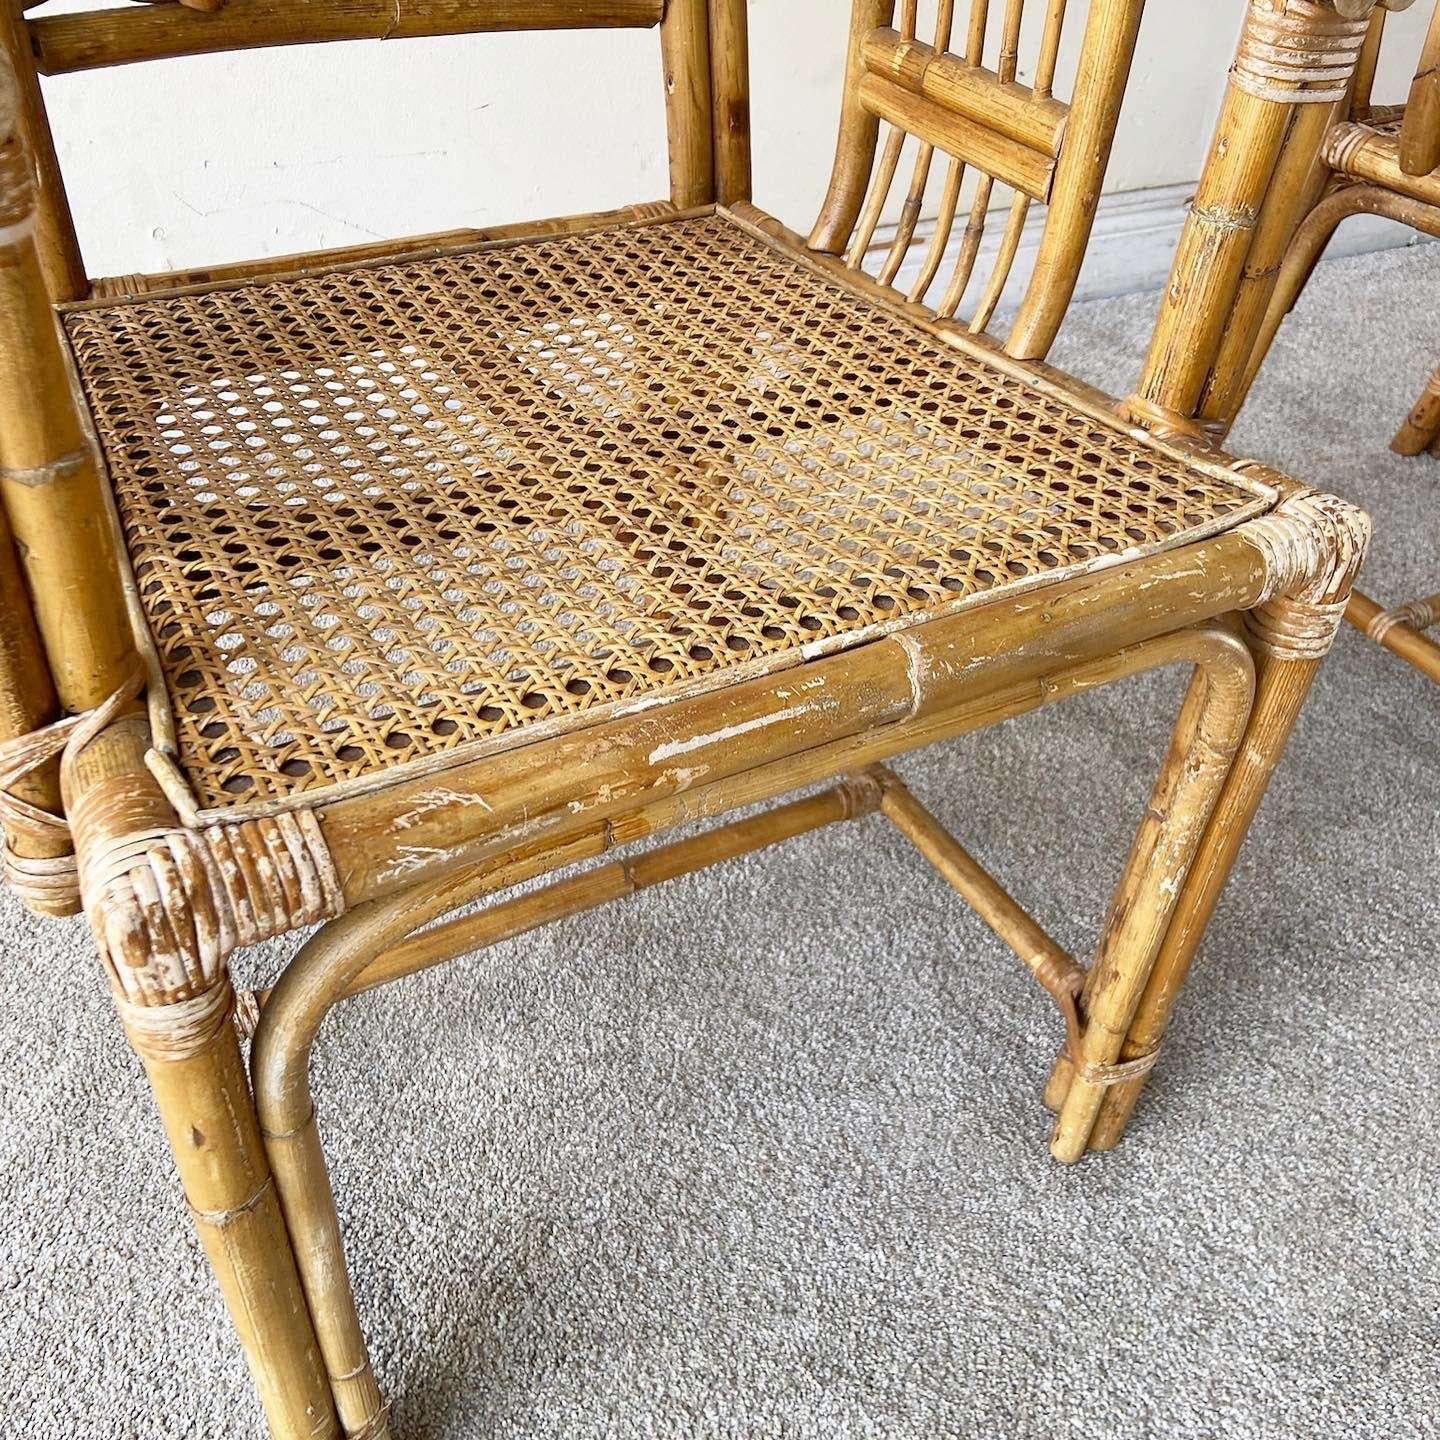 Boho Chic Bamboo Rattan and Cane Dining Chairs Attributed to Brighton - a Pair For Sale 5